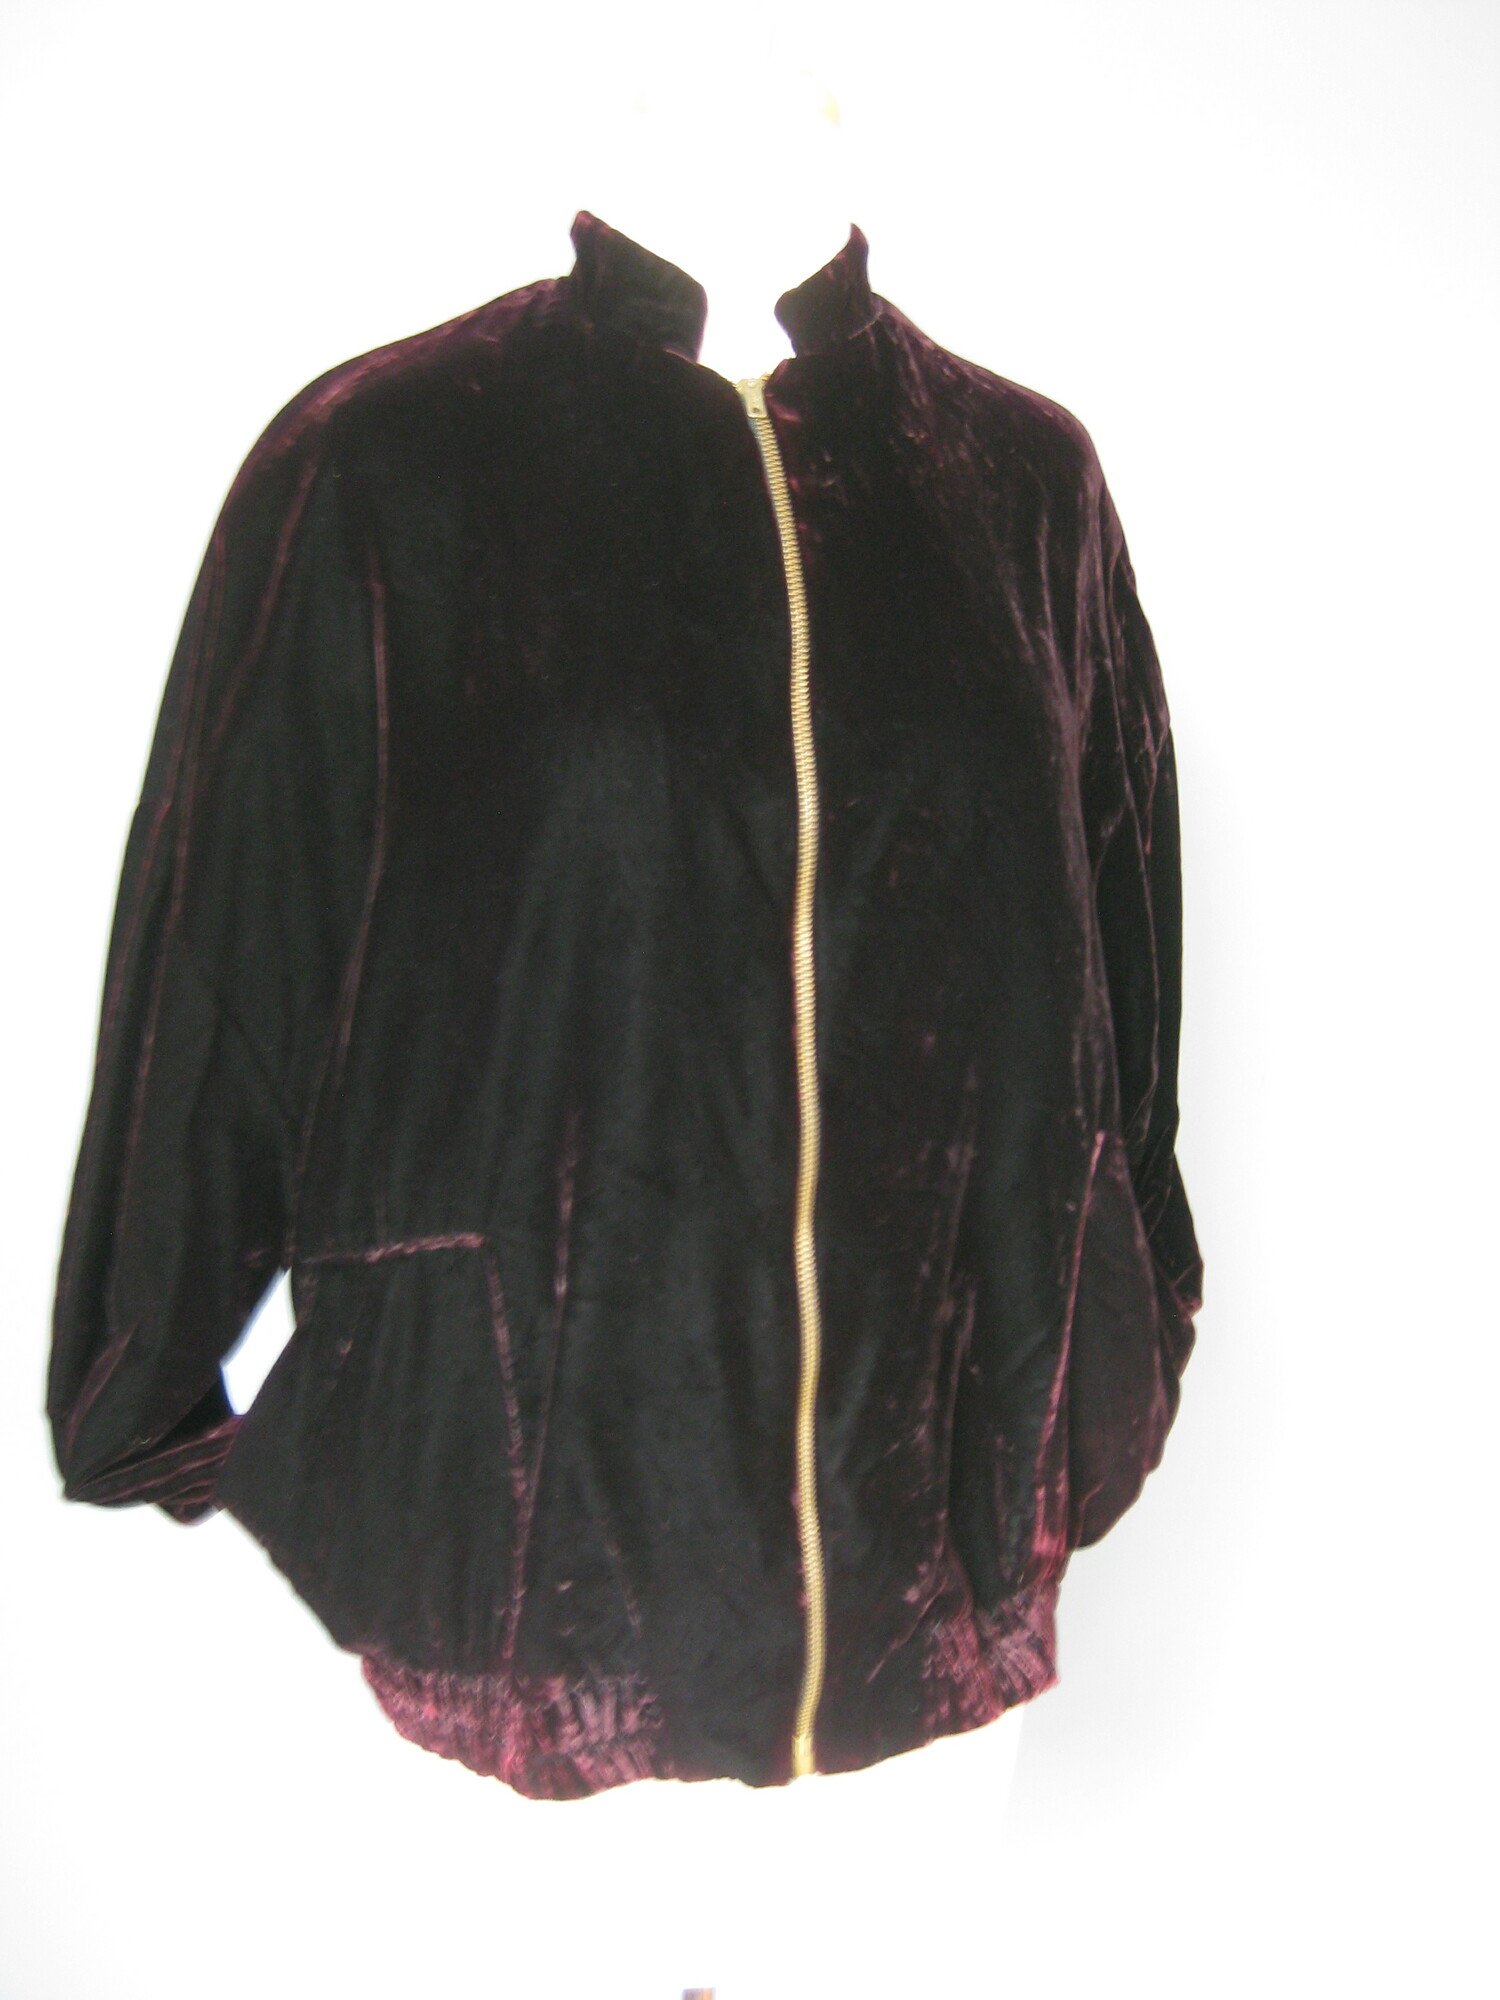 This is a deep deep almost black burgundy velvet warmup jacket upcycled by its former owner with sequined stars and tap shoes on the back.
Sturdy metal zipper
pockets
by Concepts
excellent condition

Flat Measurements:
Shoulder to Shoulder: 18
Armpit to Armpit: 22.5
Length: 28
Underarm sleeve seam: 16.5

excellent condition!

Thanks for looking!
#43215